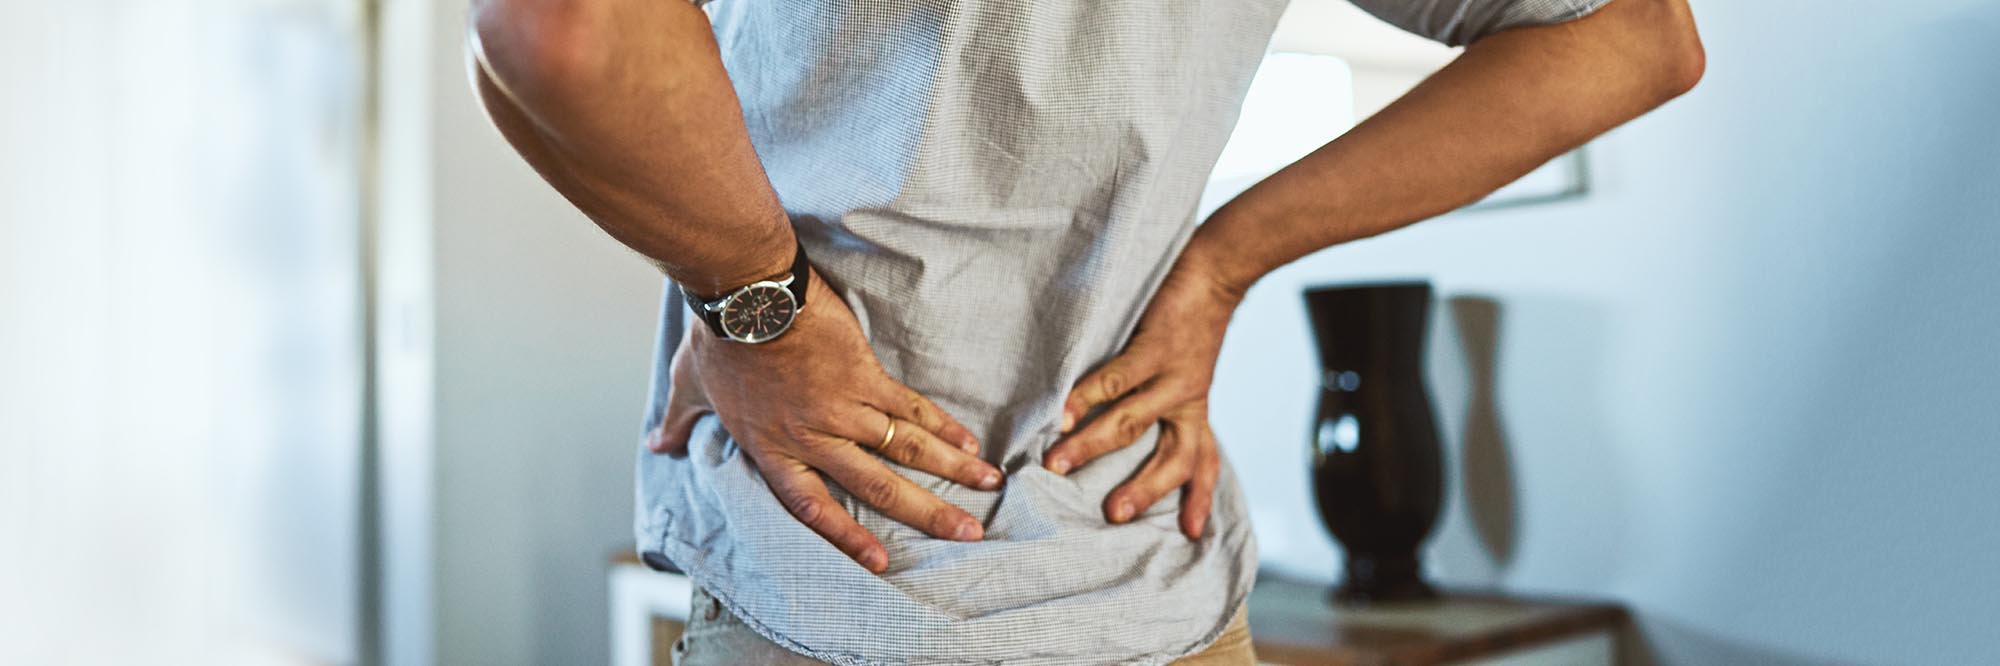 Sciatica pain relief and treatment options